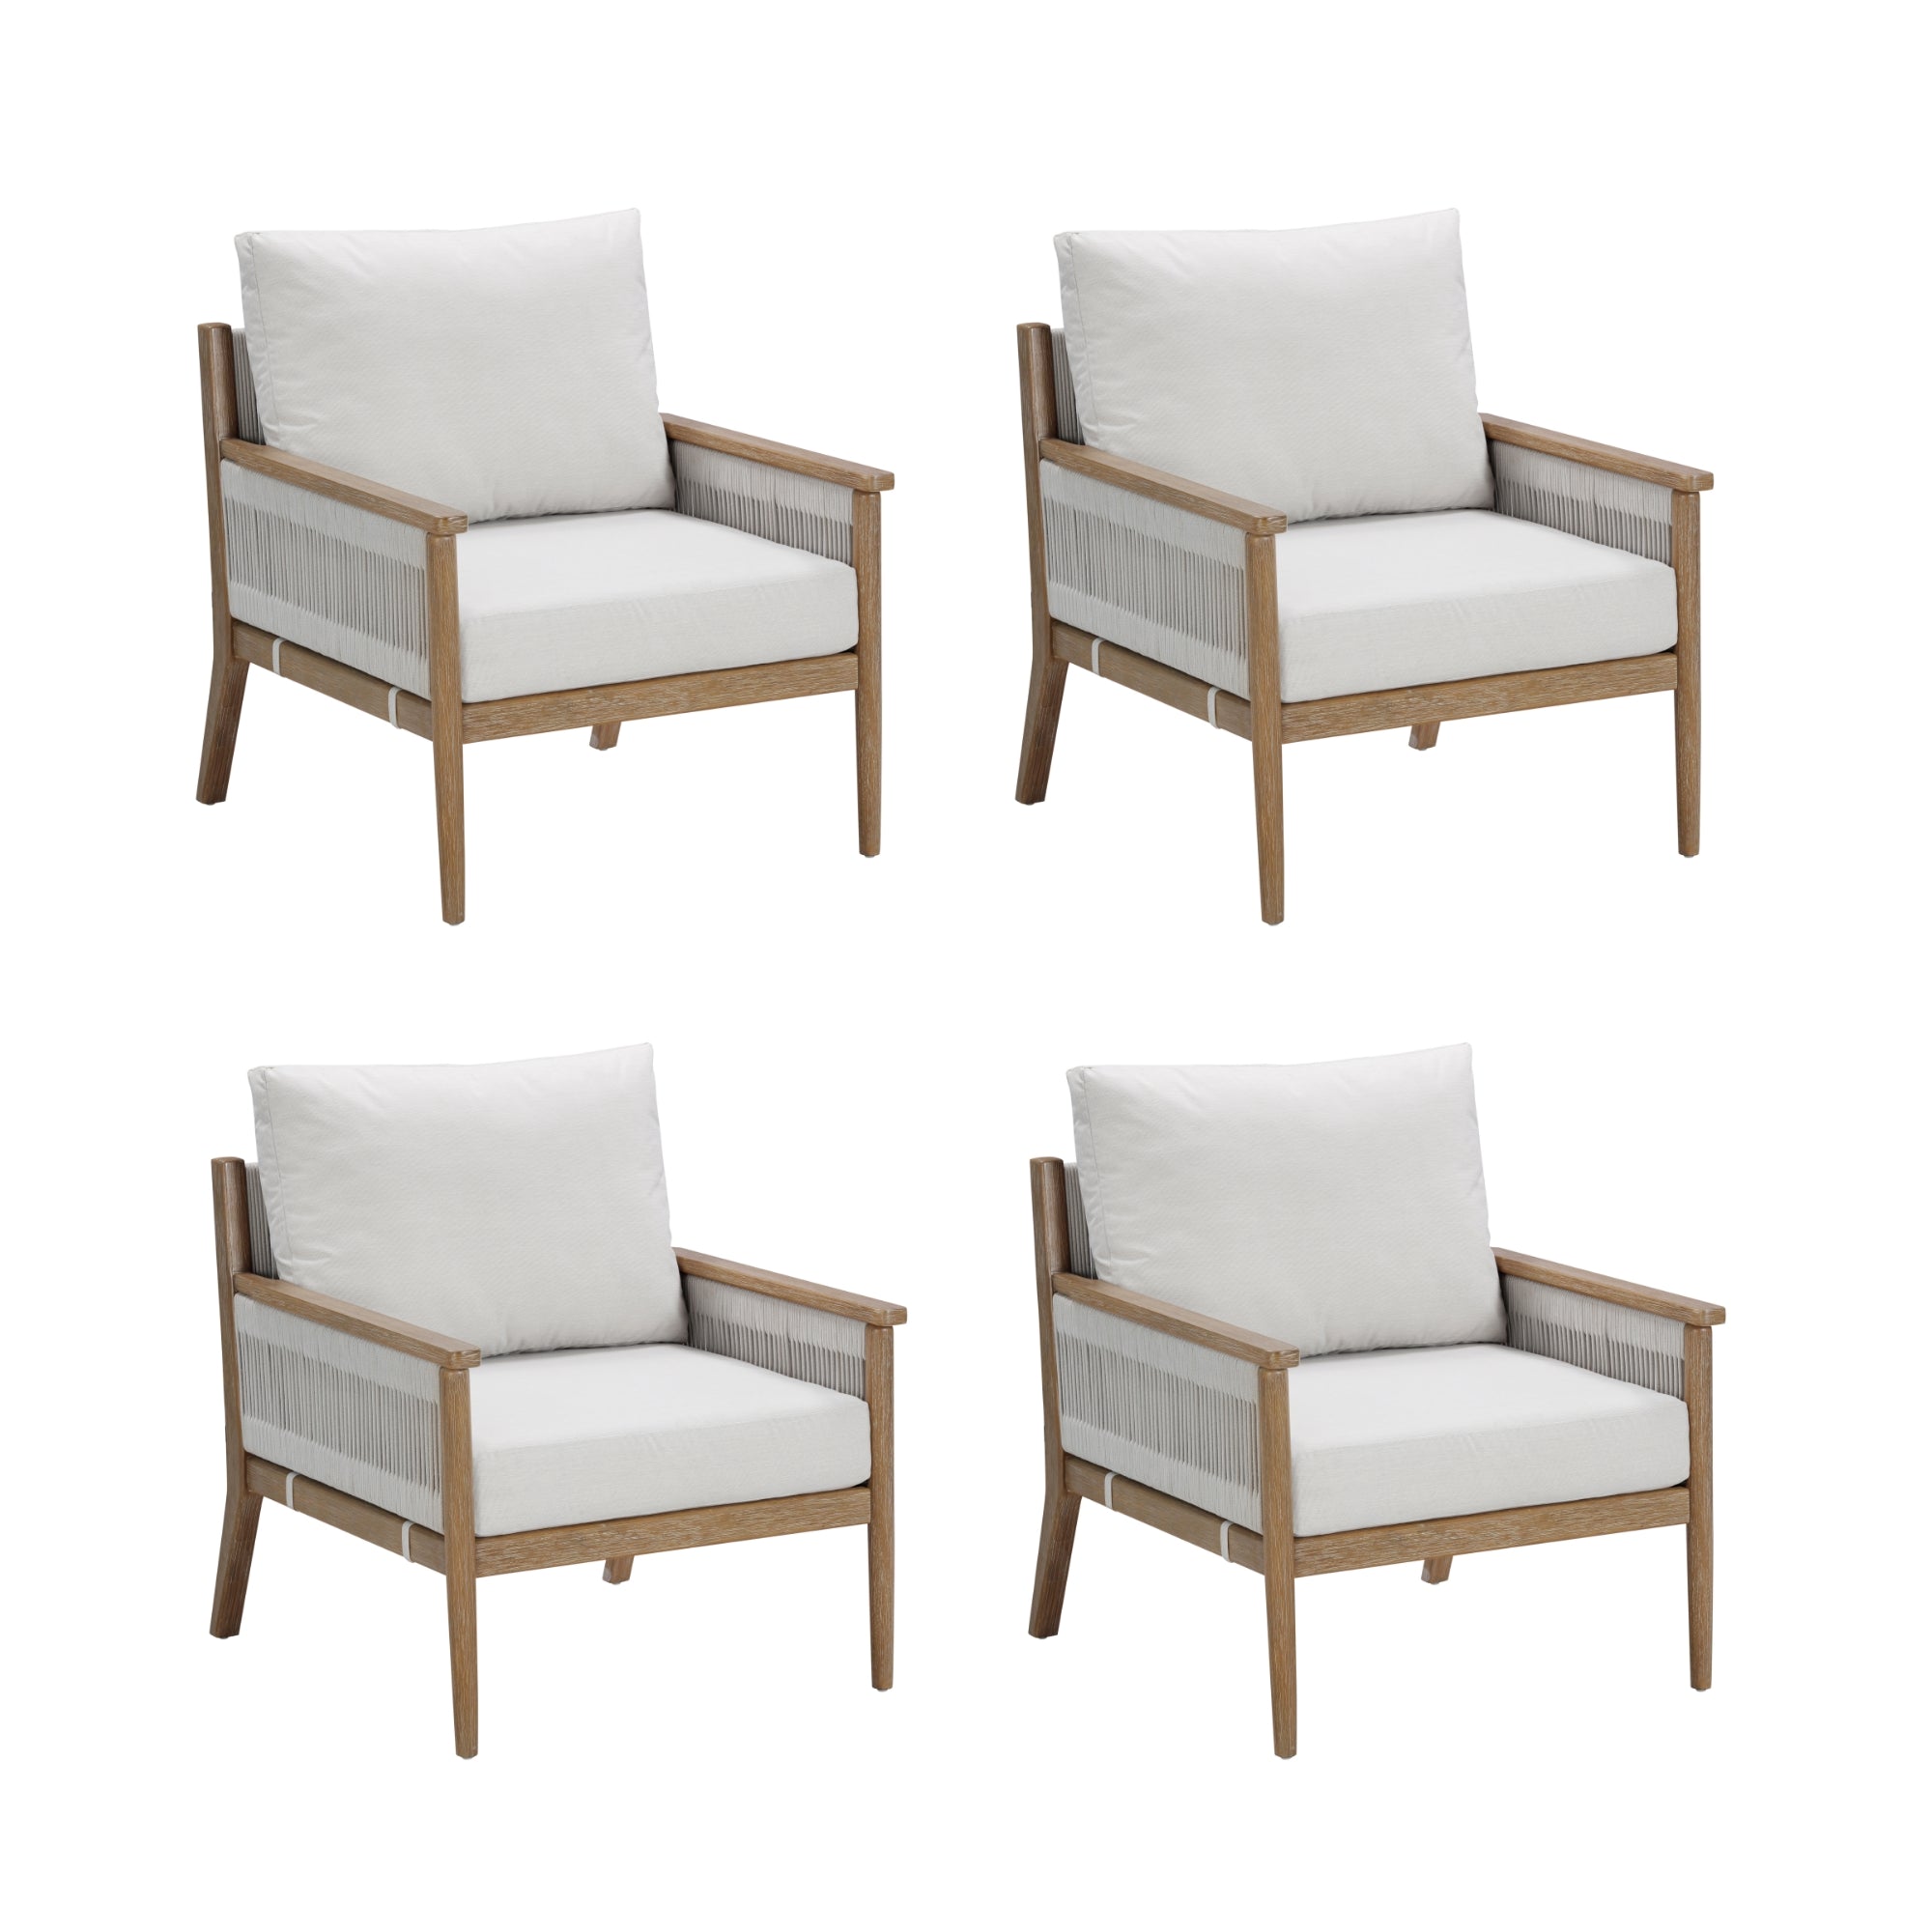 Set of 4 Rope Outdoor Patio Arm Chairs